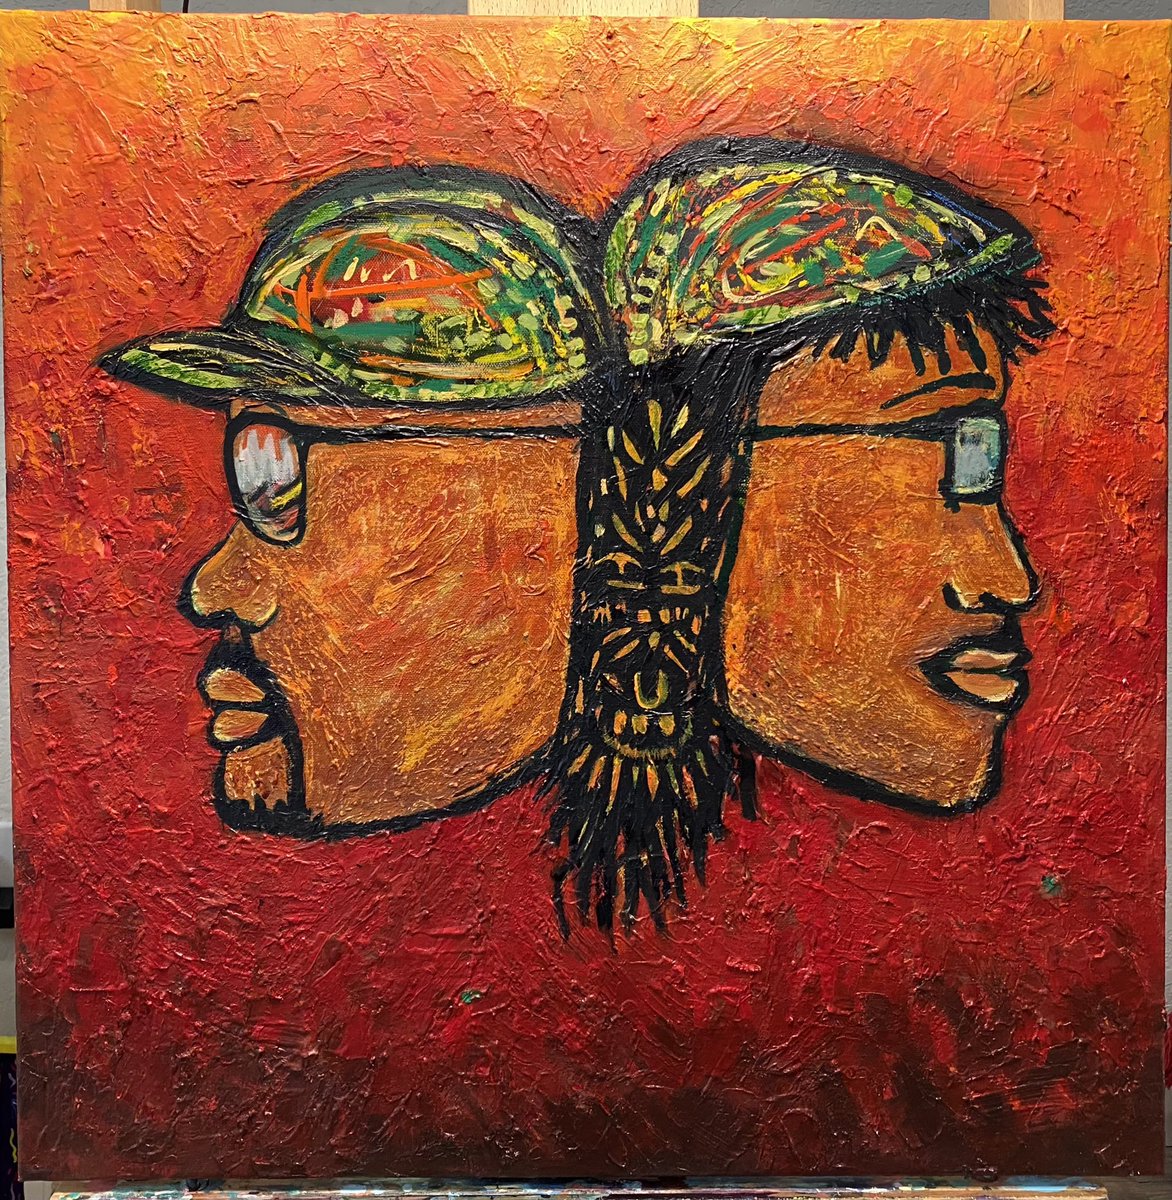 Hello:

'Ogun Dub' by Sly & Robbie Now Available exclusively on tabou1.com
This NFT release is now available for pre-order on TABOU1 in three unique Red Green and Gold editions

Check it out